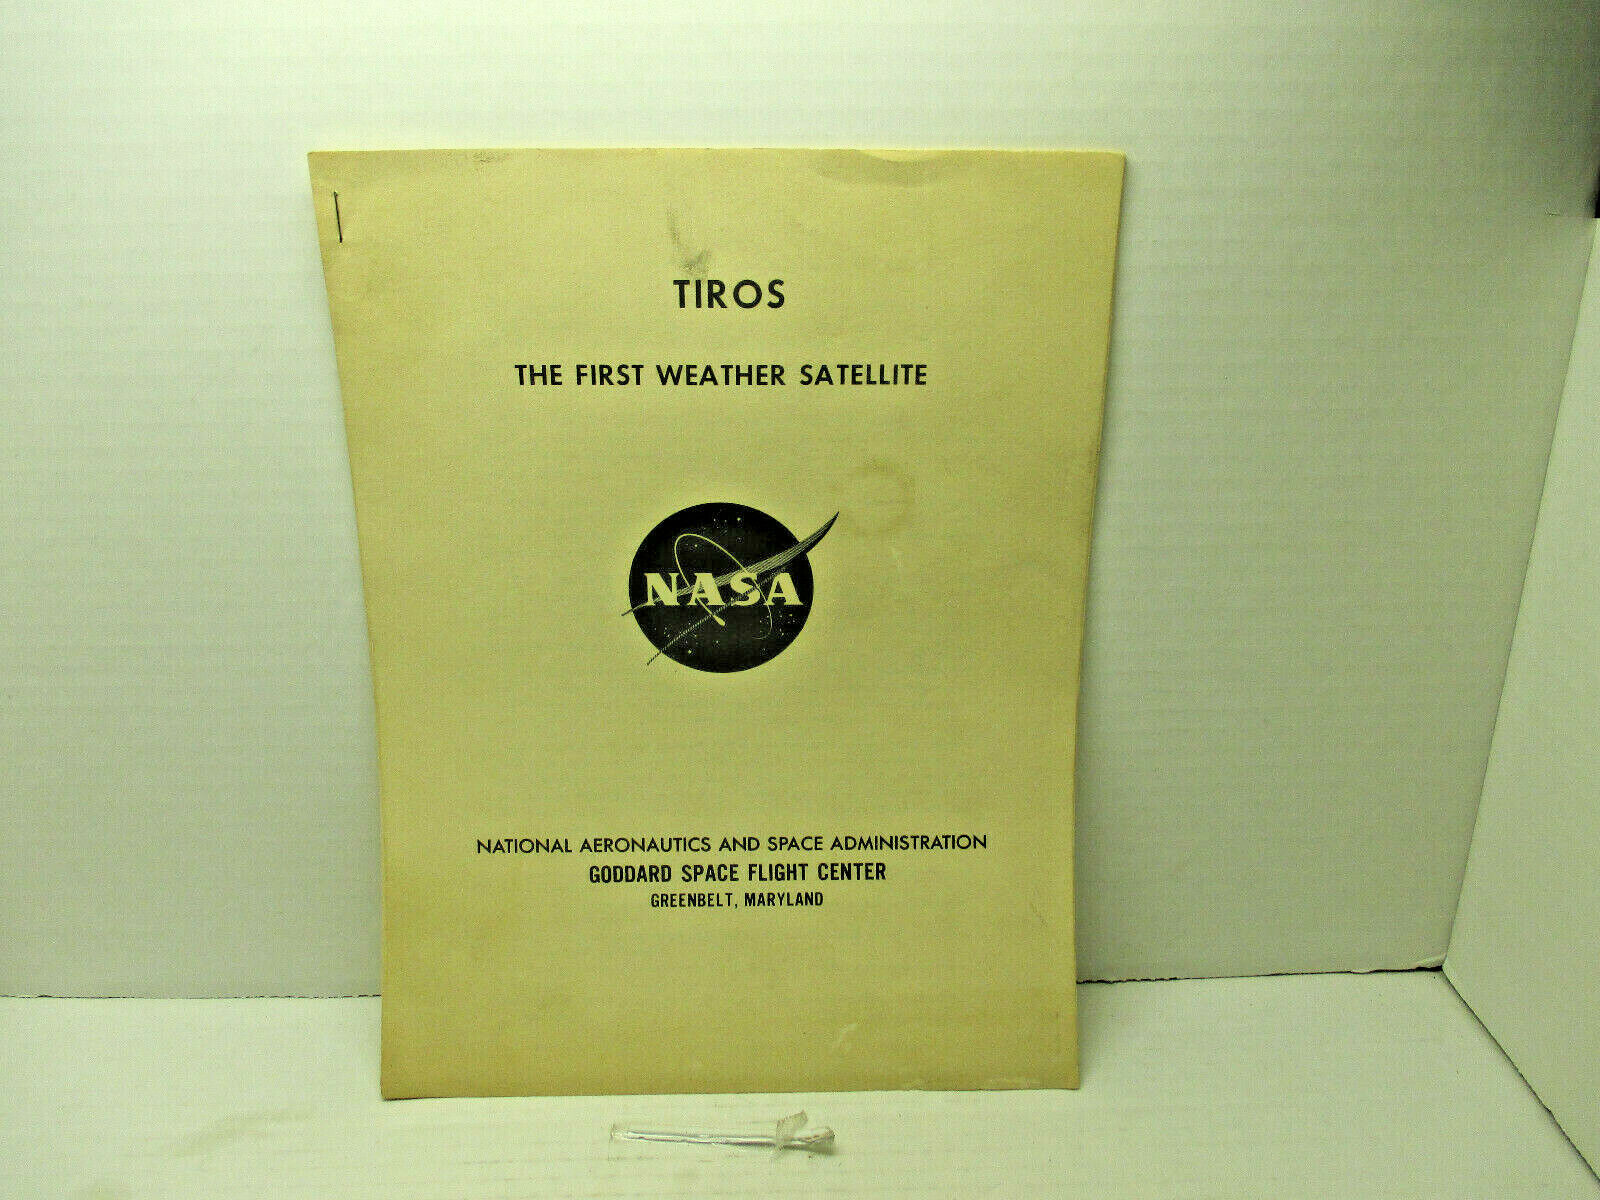 vintage Issue of NASA Facts featuring the Tiros Weather Satellite